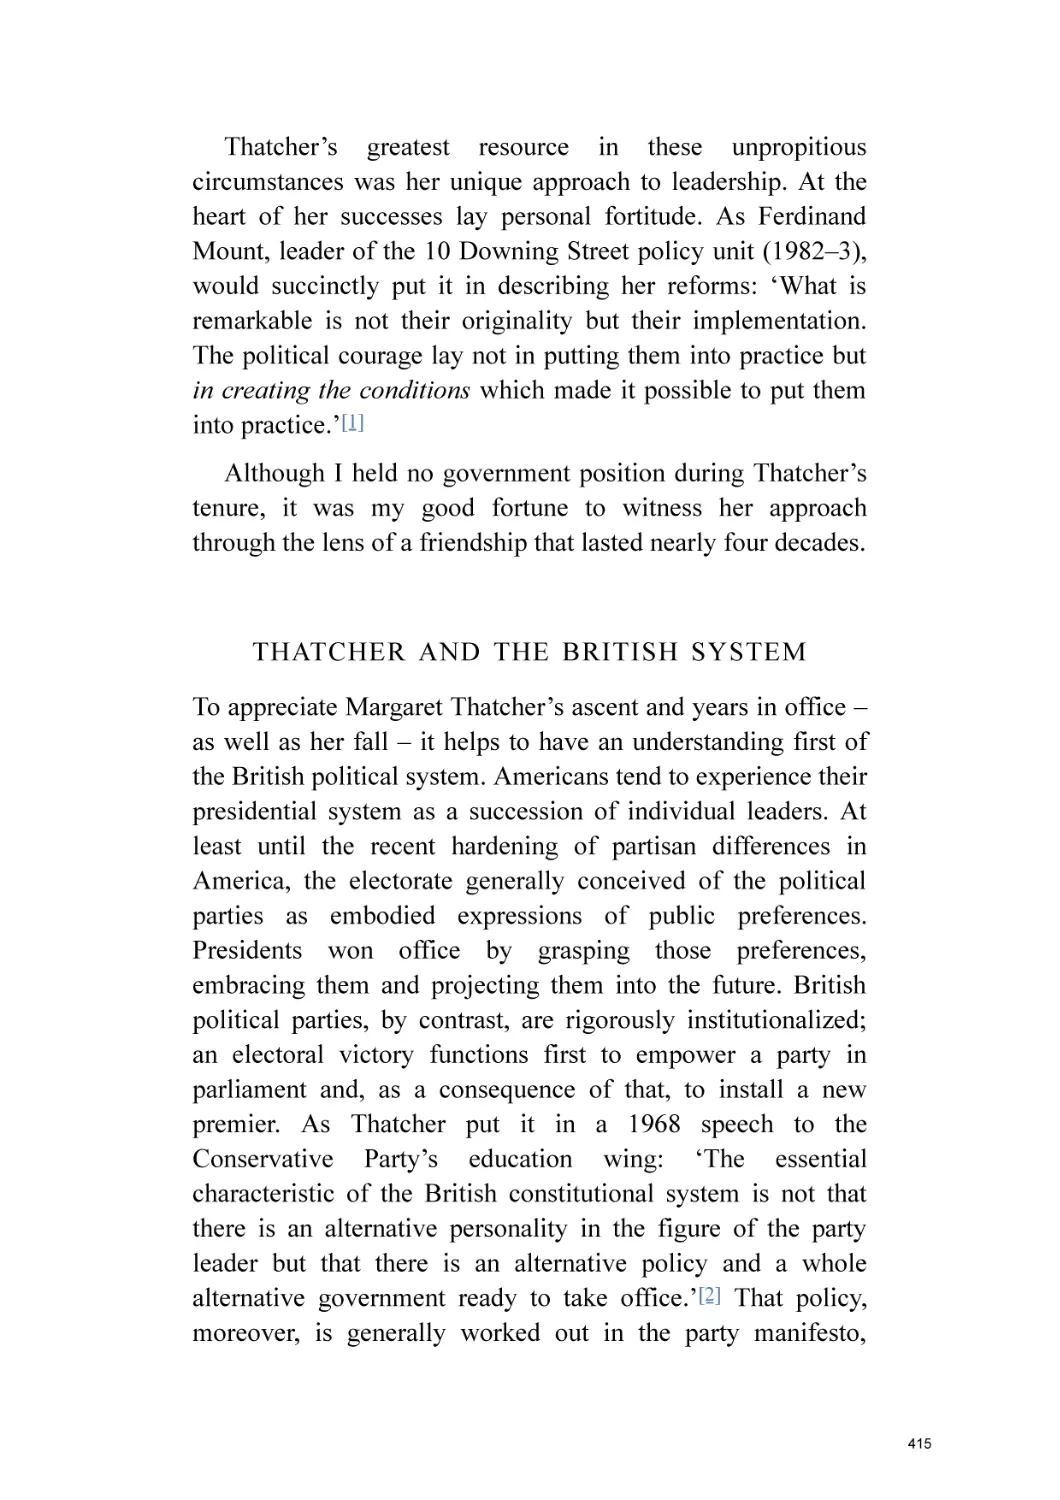 Thatcher and the British System